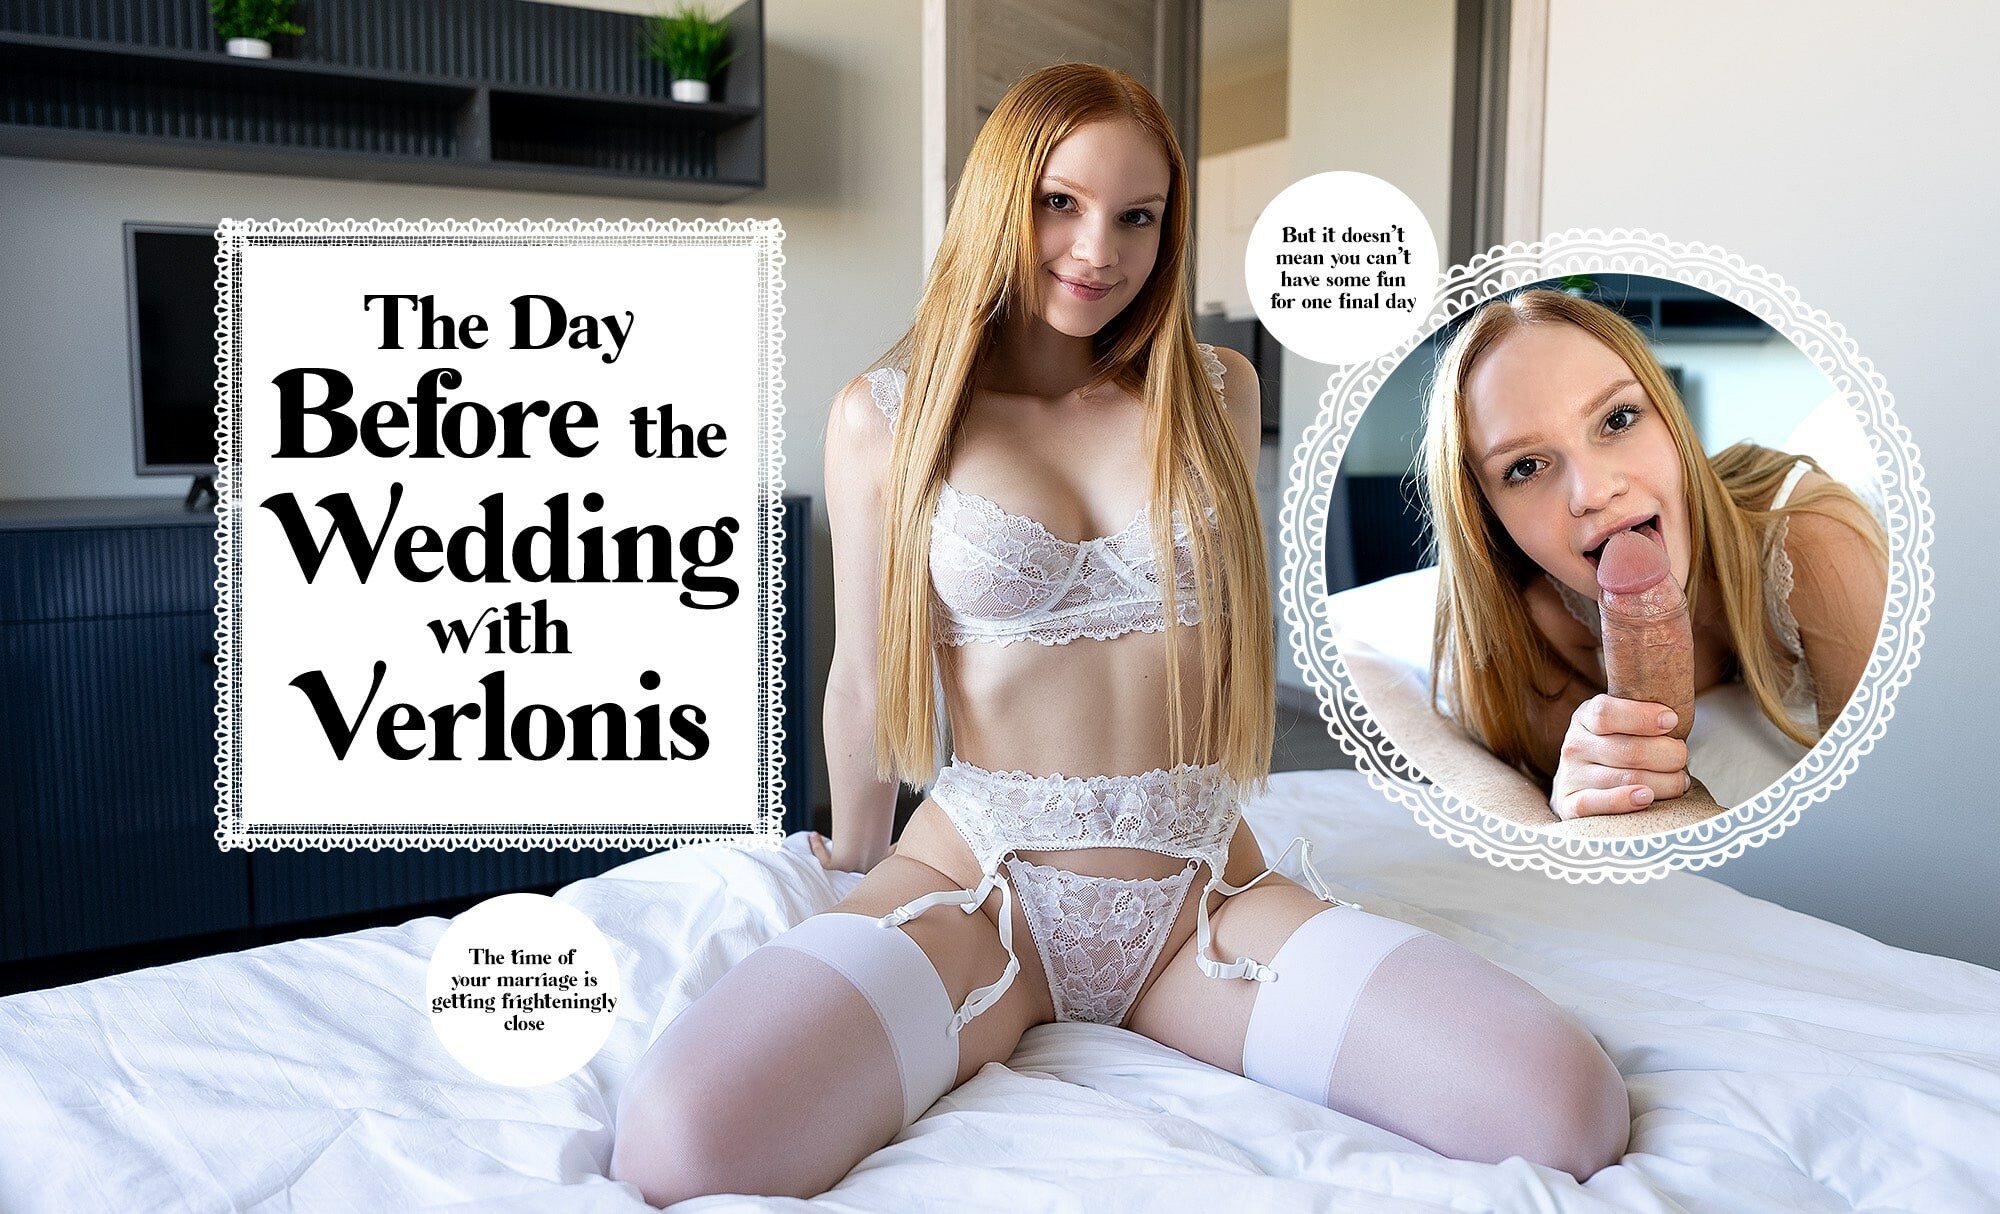 Verlonis “The Day Before the Wedding with Verlonis” LifeSelector